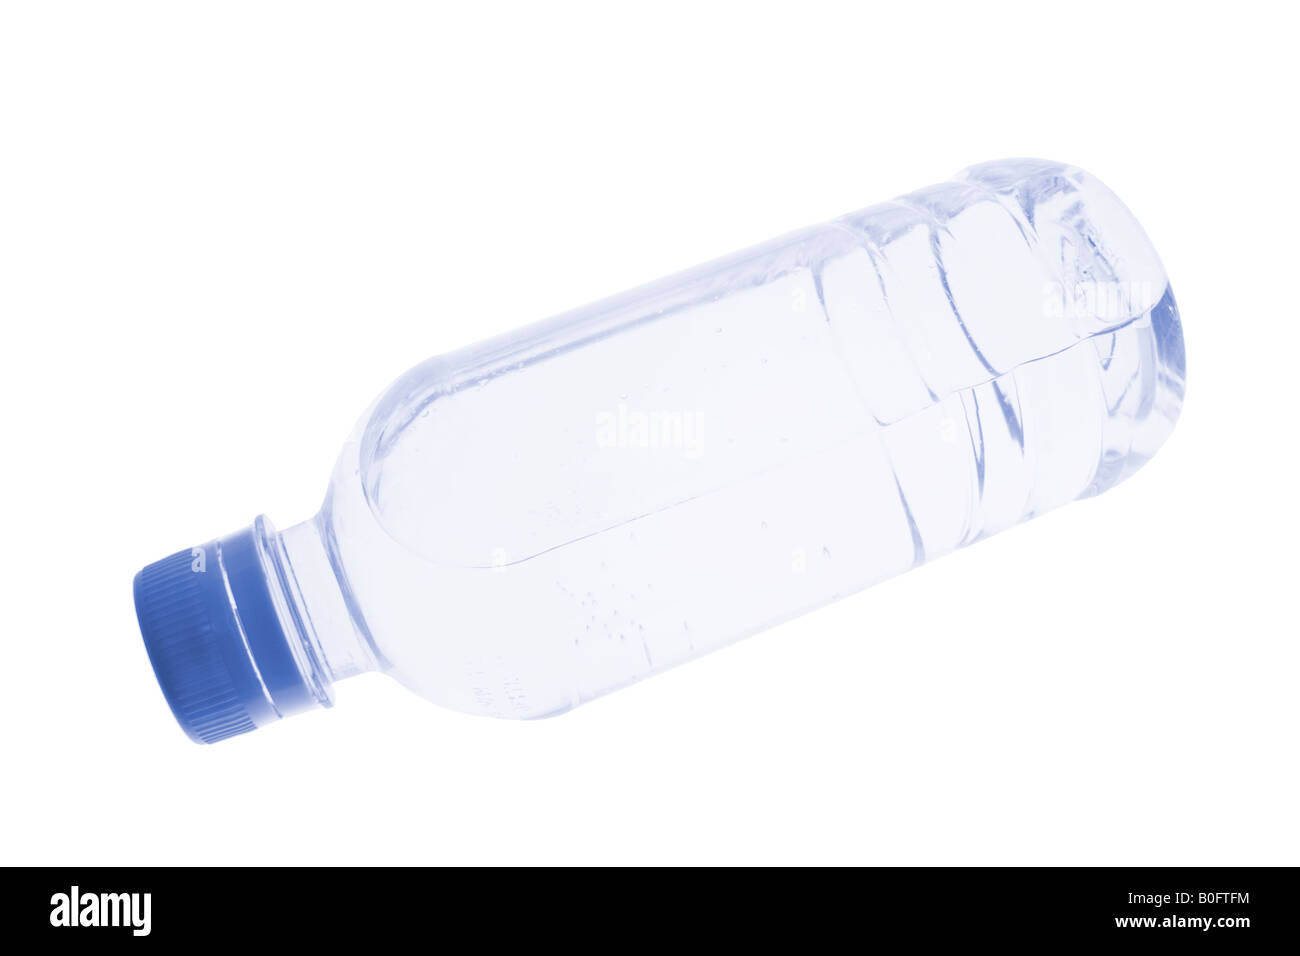 Bottle of Water Stock Photo